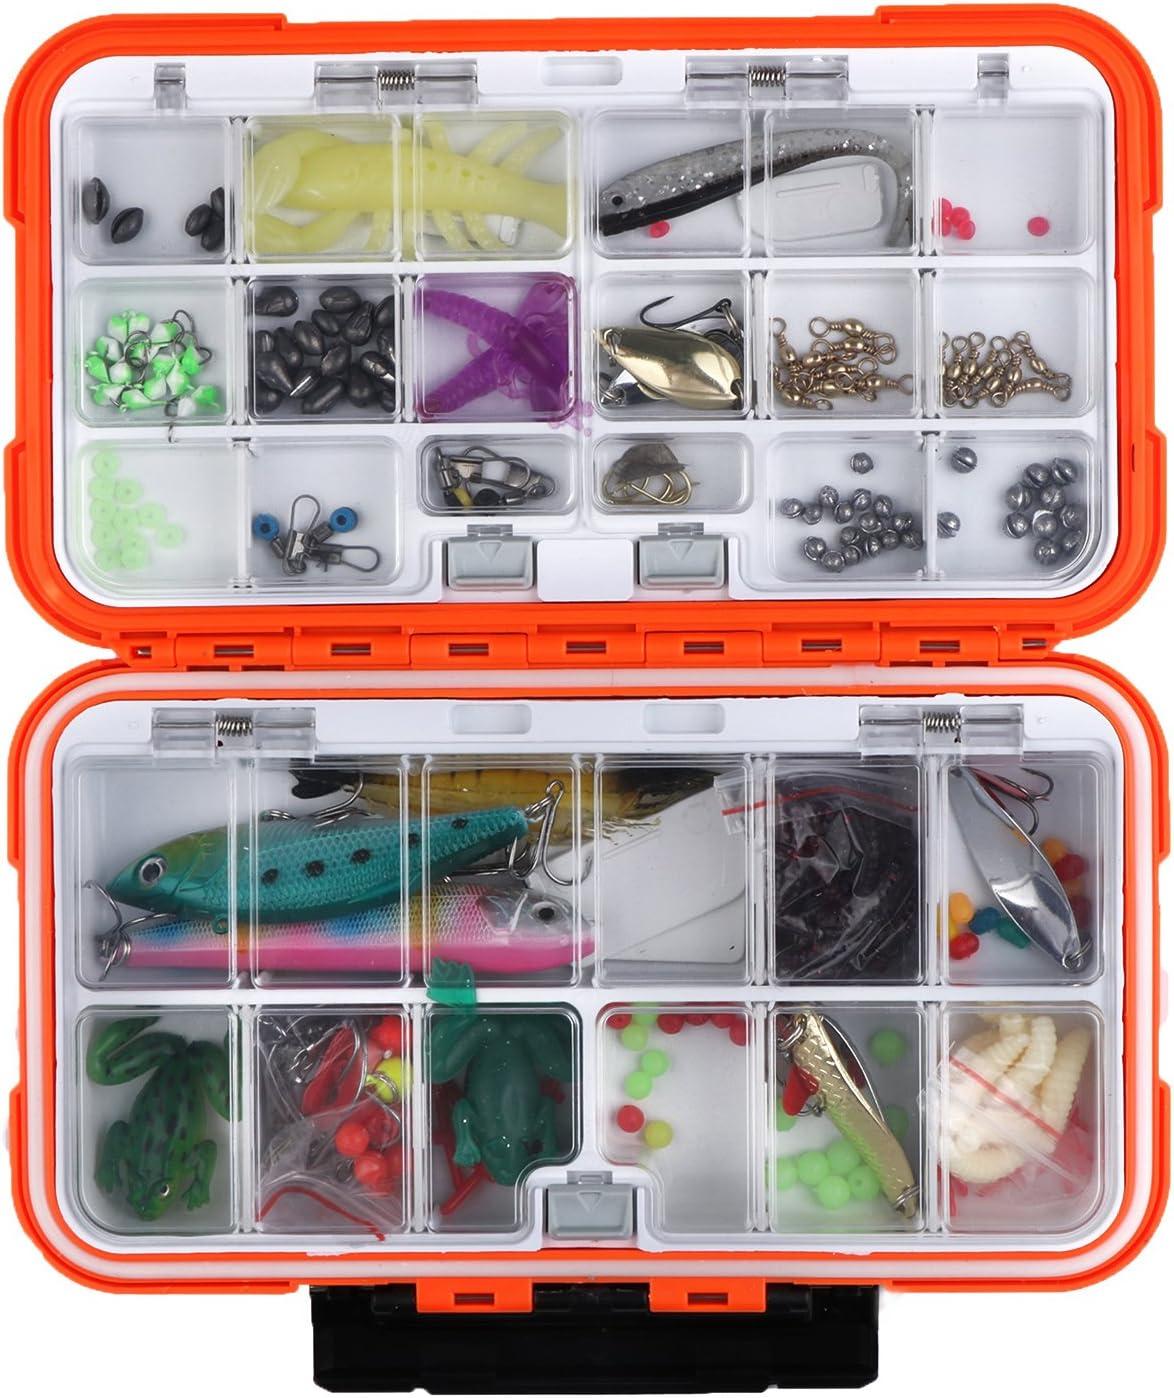 Goture Small Tackle Box, Waterproof Fishing Lure Boxes, Storage Case Bait  Plastic Accessories Containers Orange SMALL 7.8'' X 4.2'' X 1.8'' 